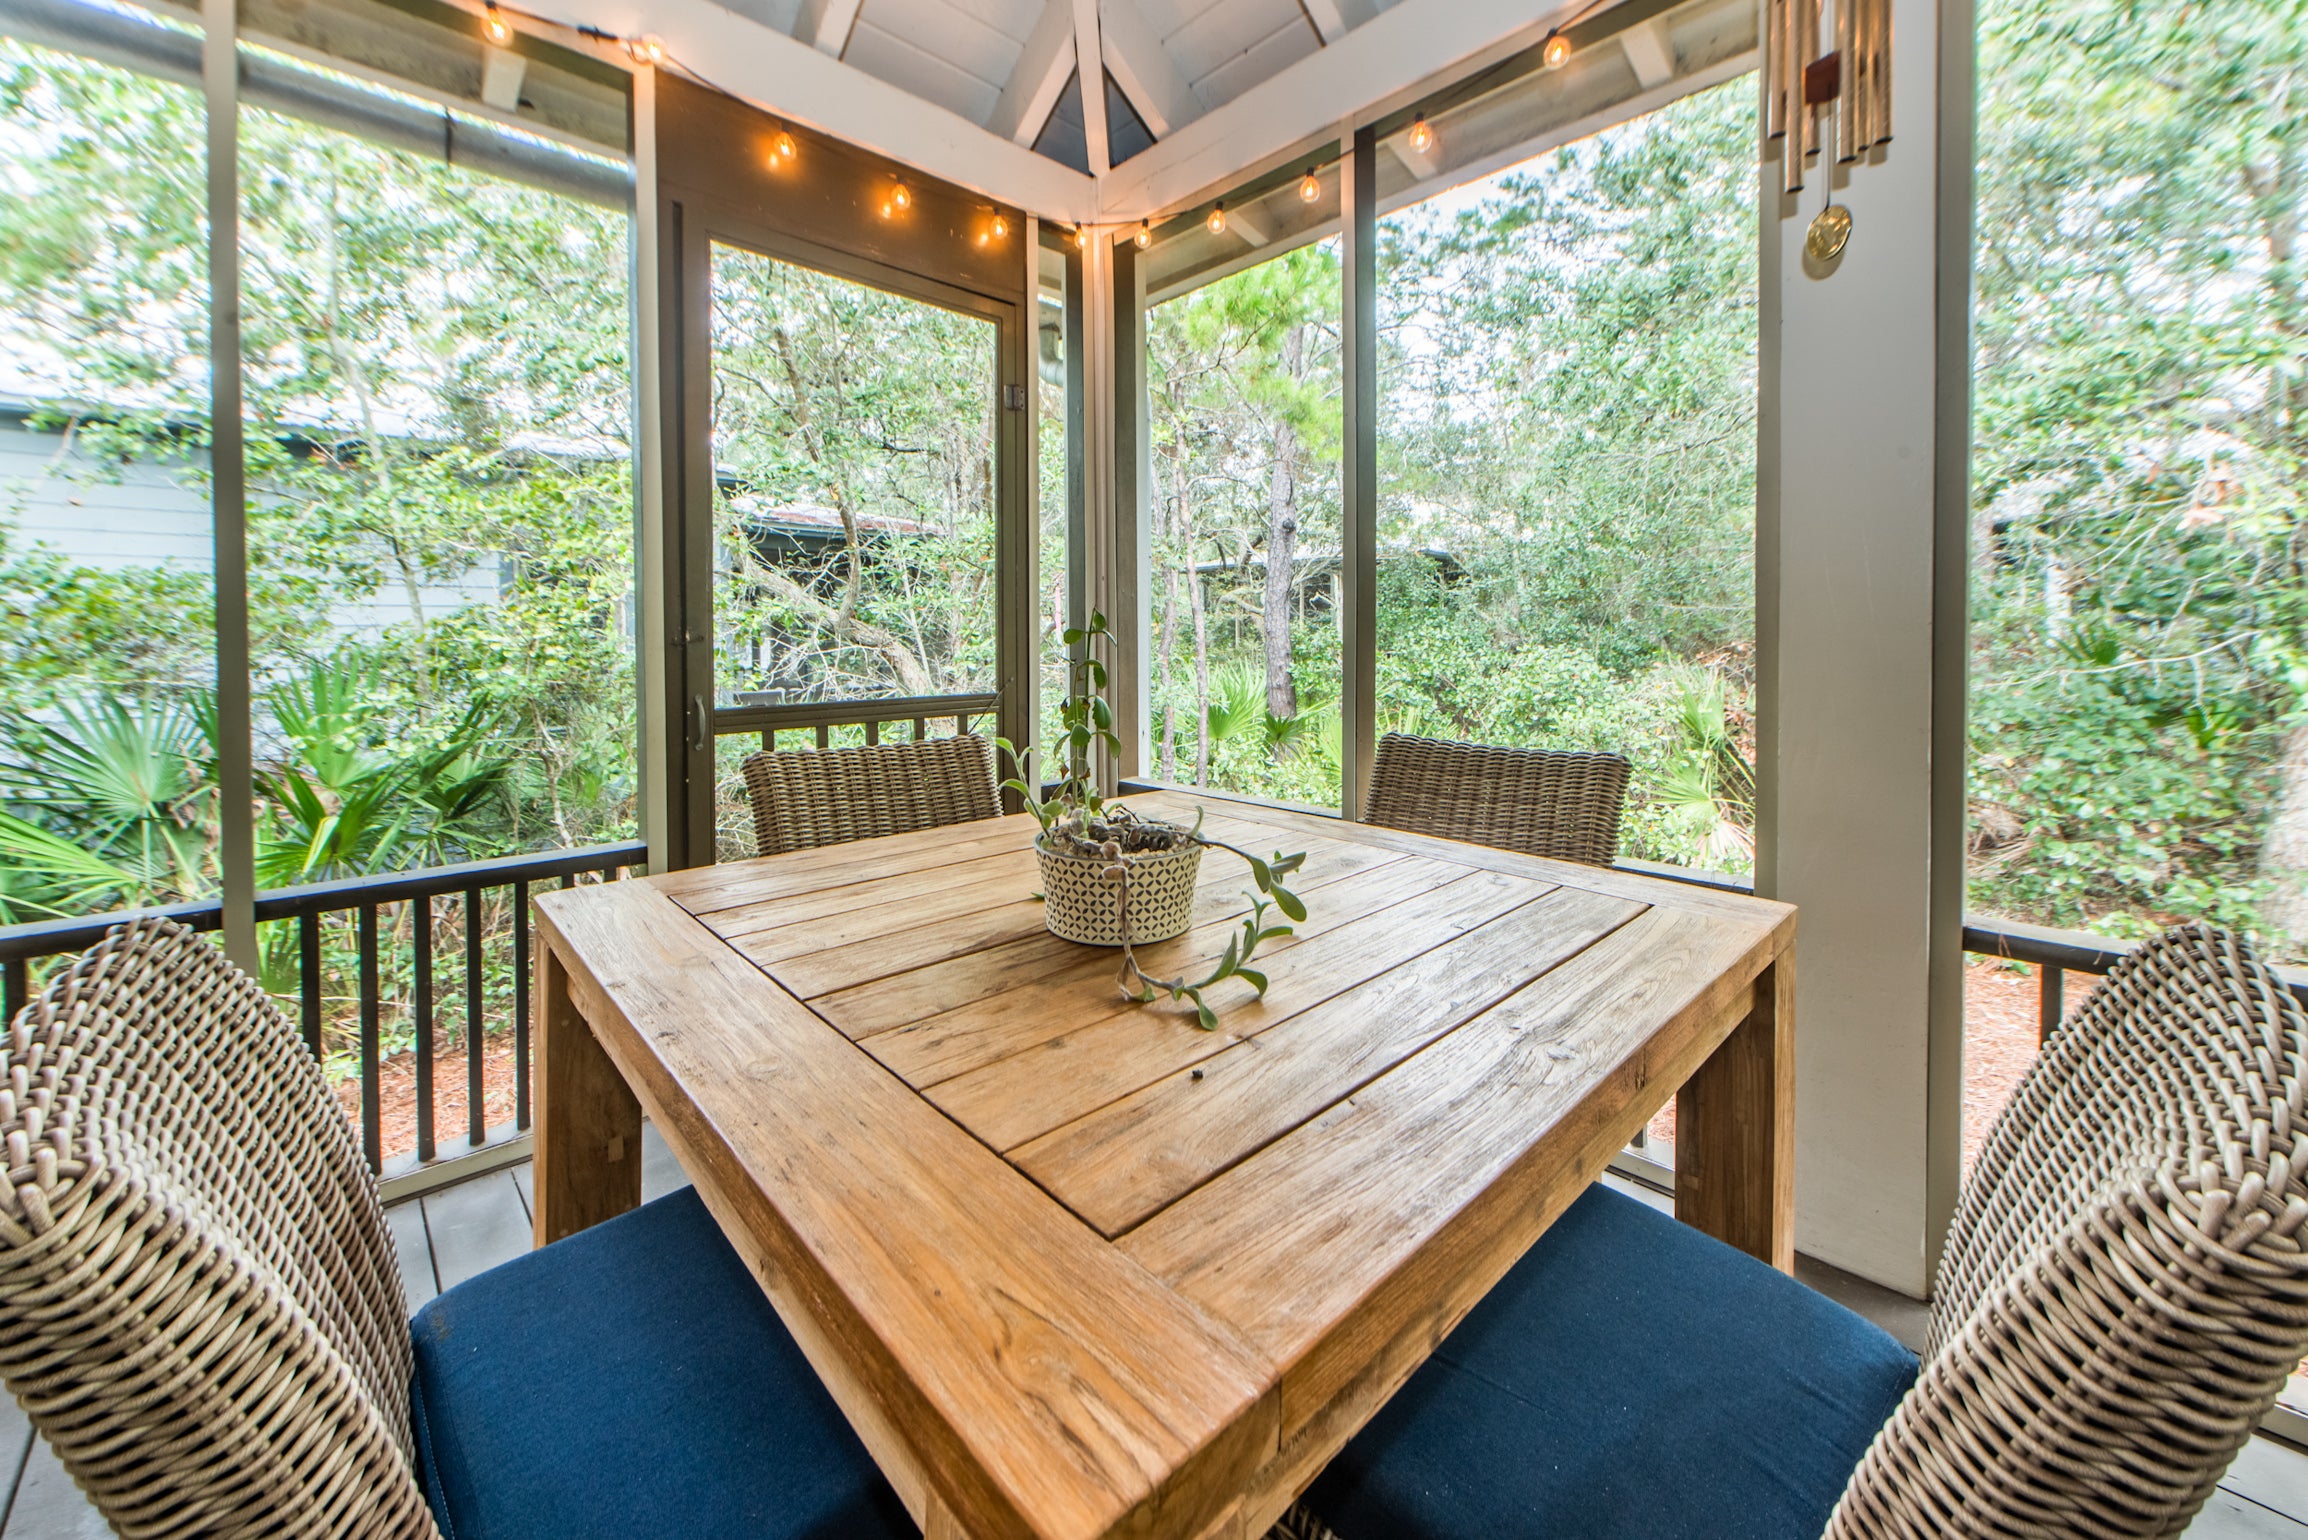 Dine in comfort on the screened deck